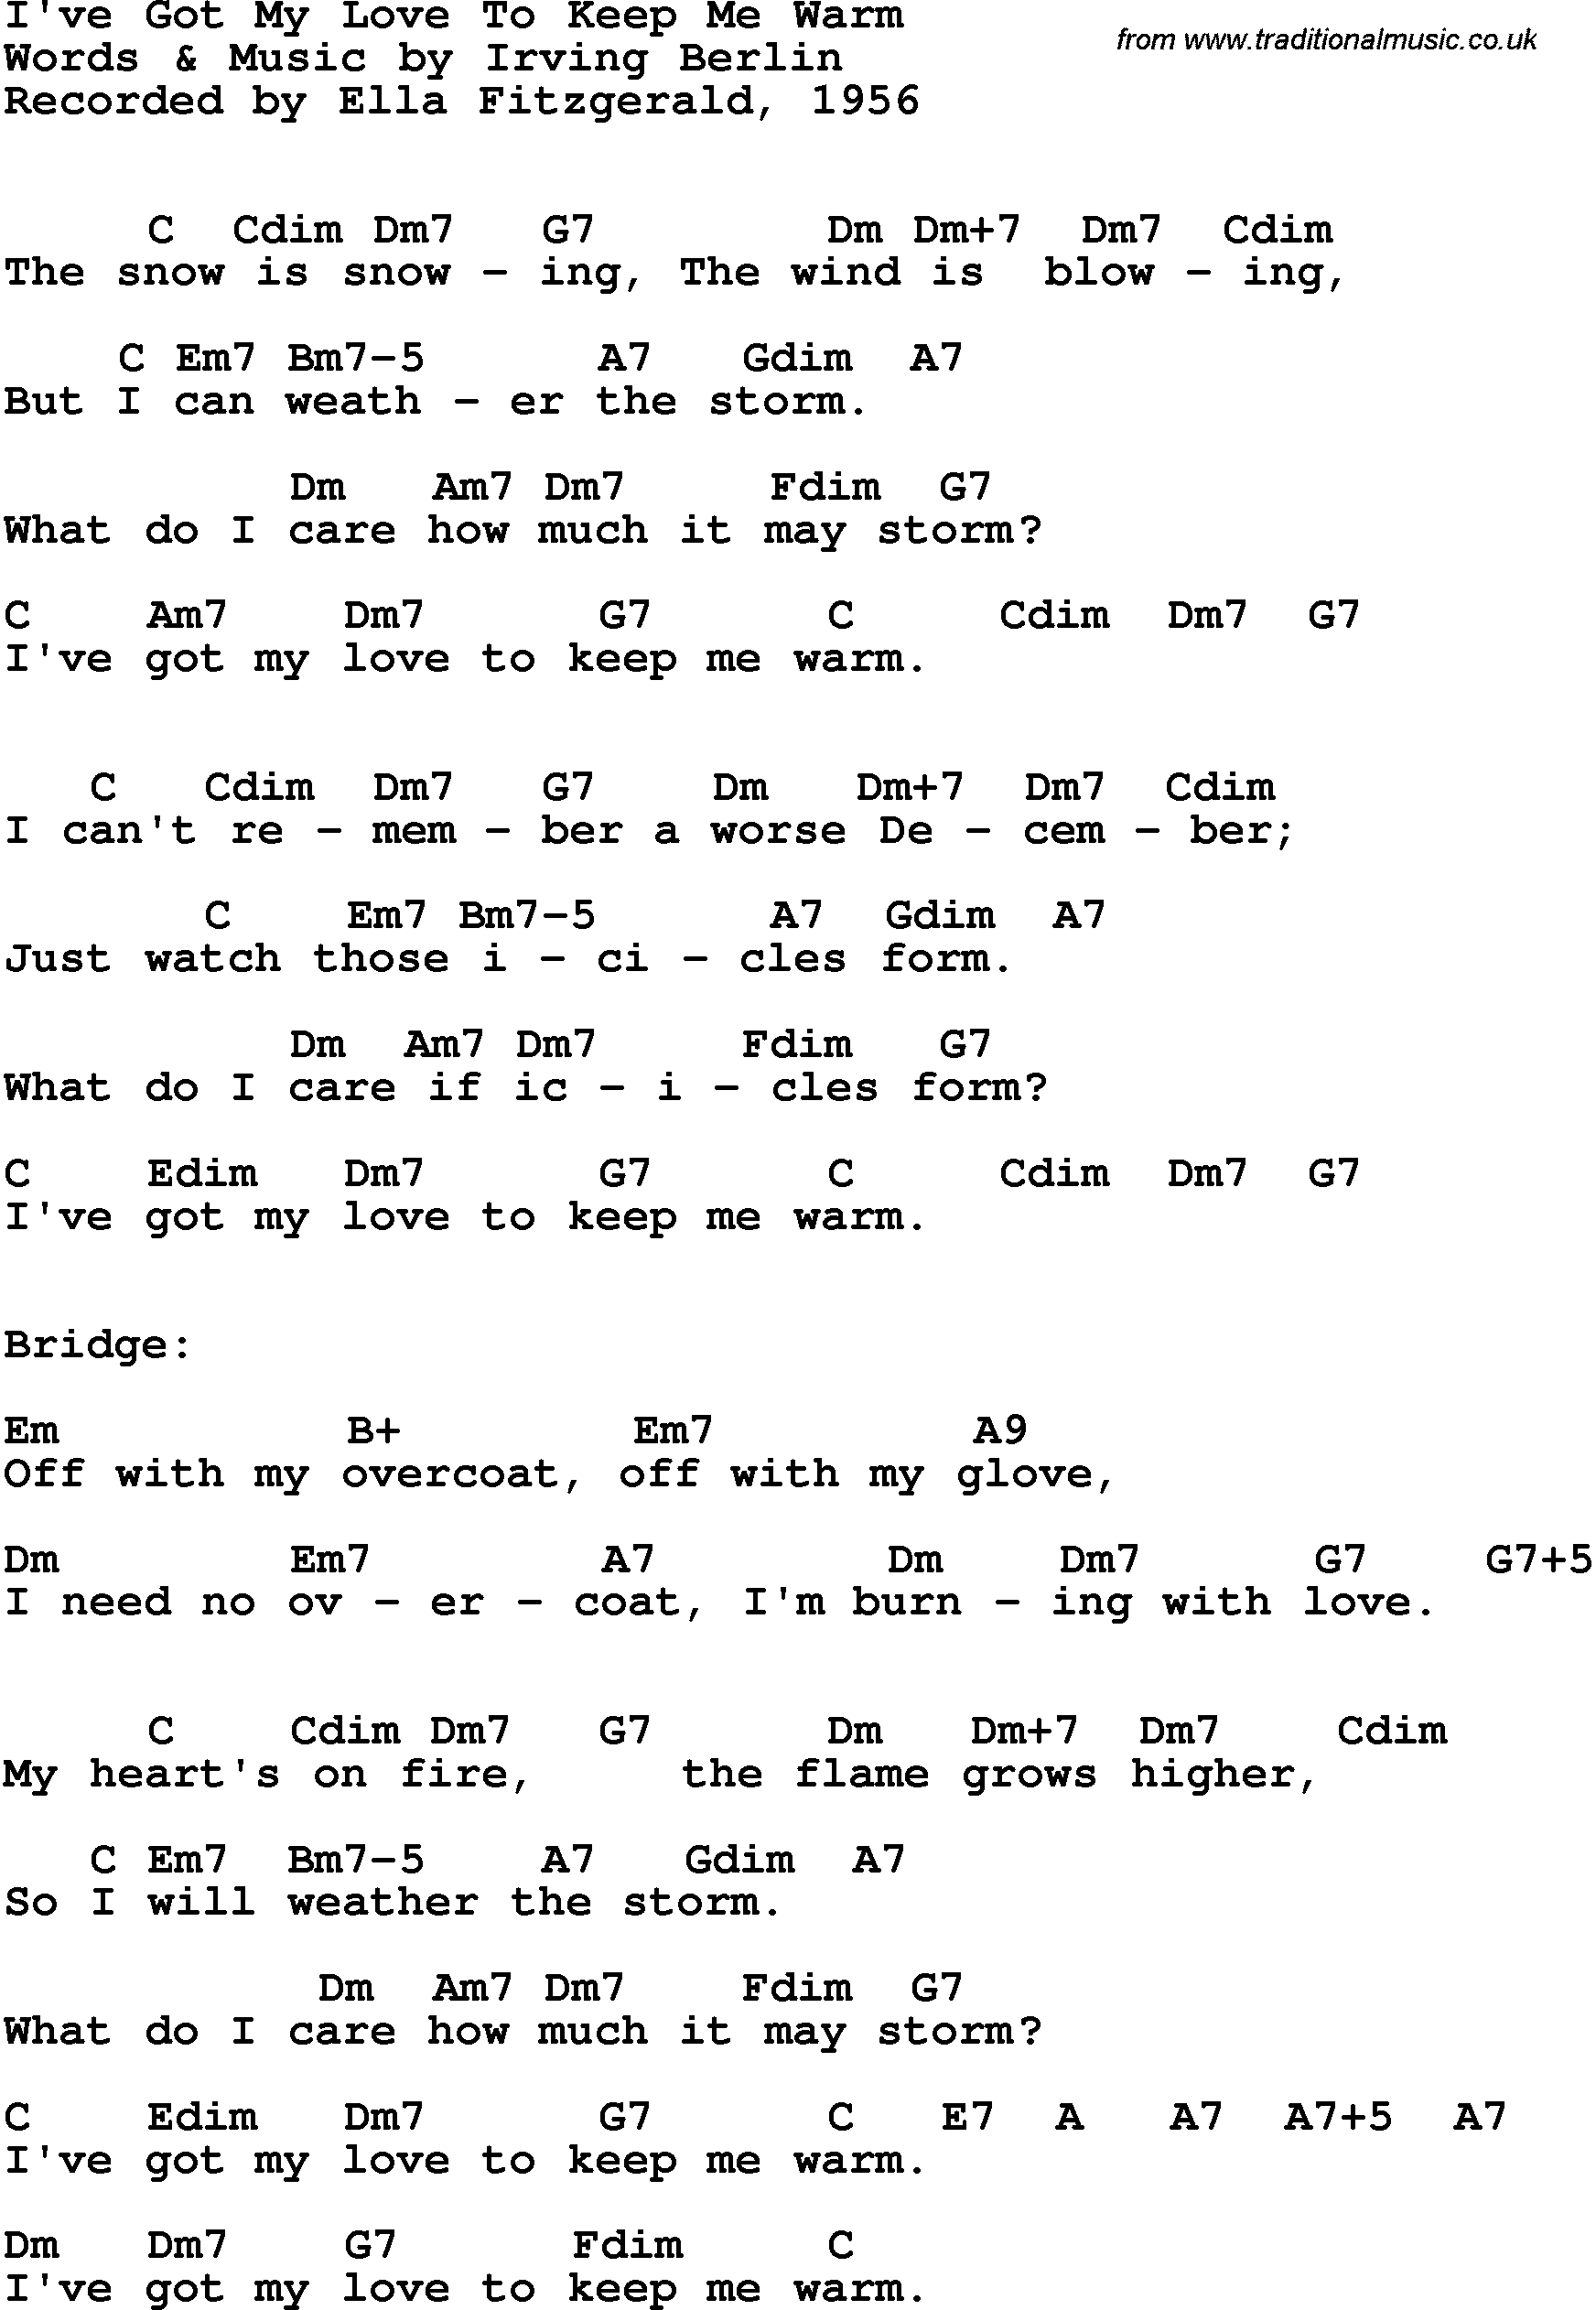 Song Lyrics with guitar chords for I've Got My Love To Keep Me Warm - Ella Fitzgerald, 1956